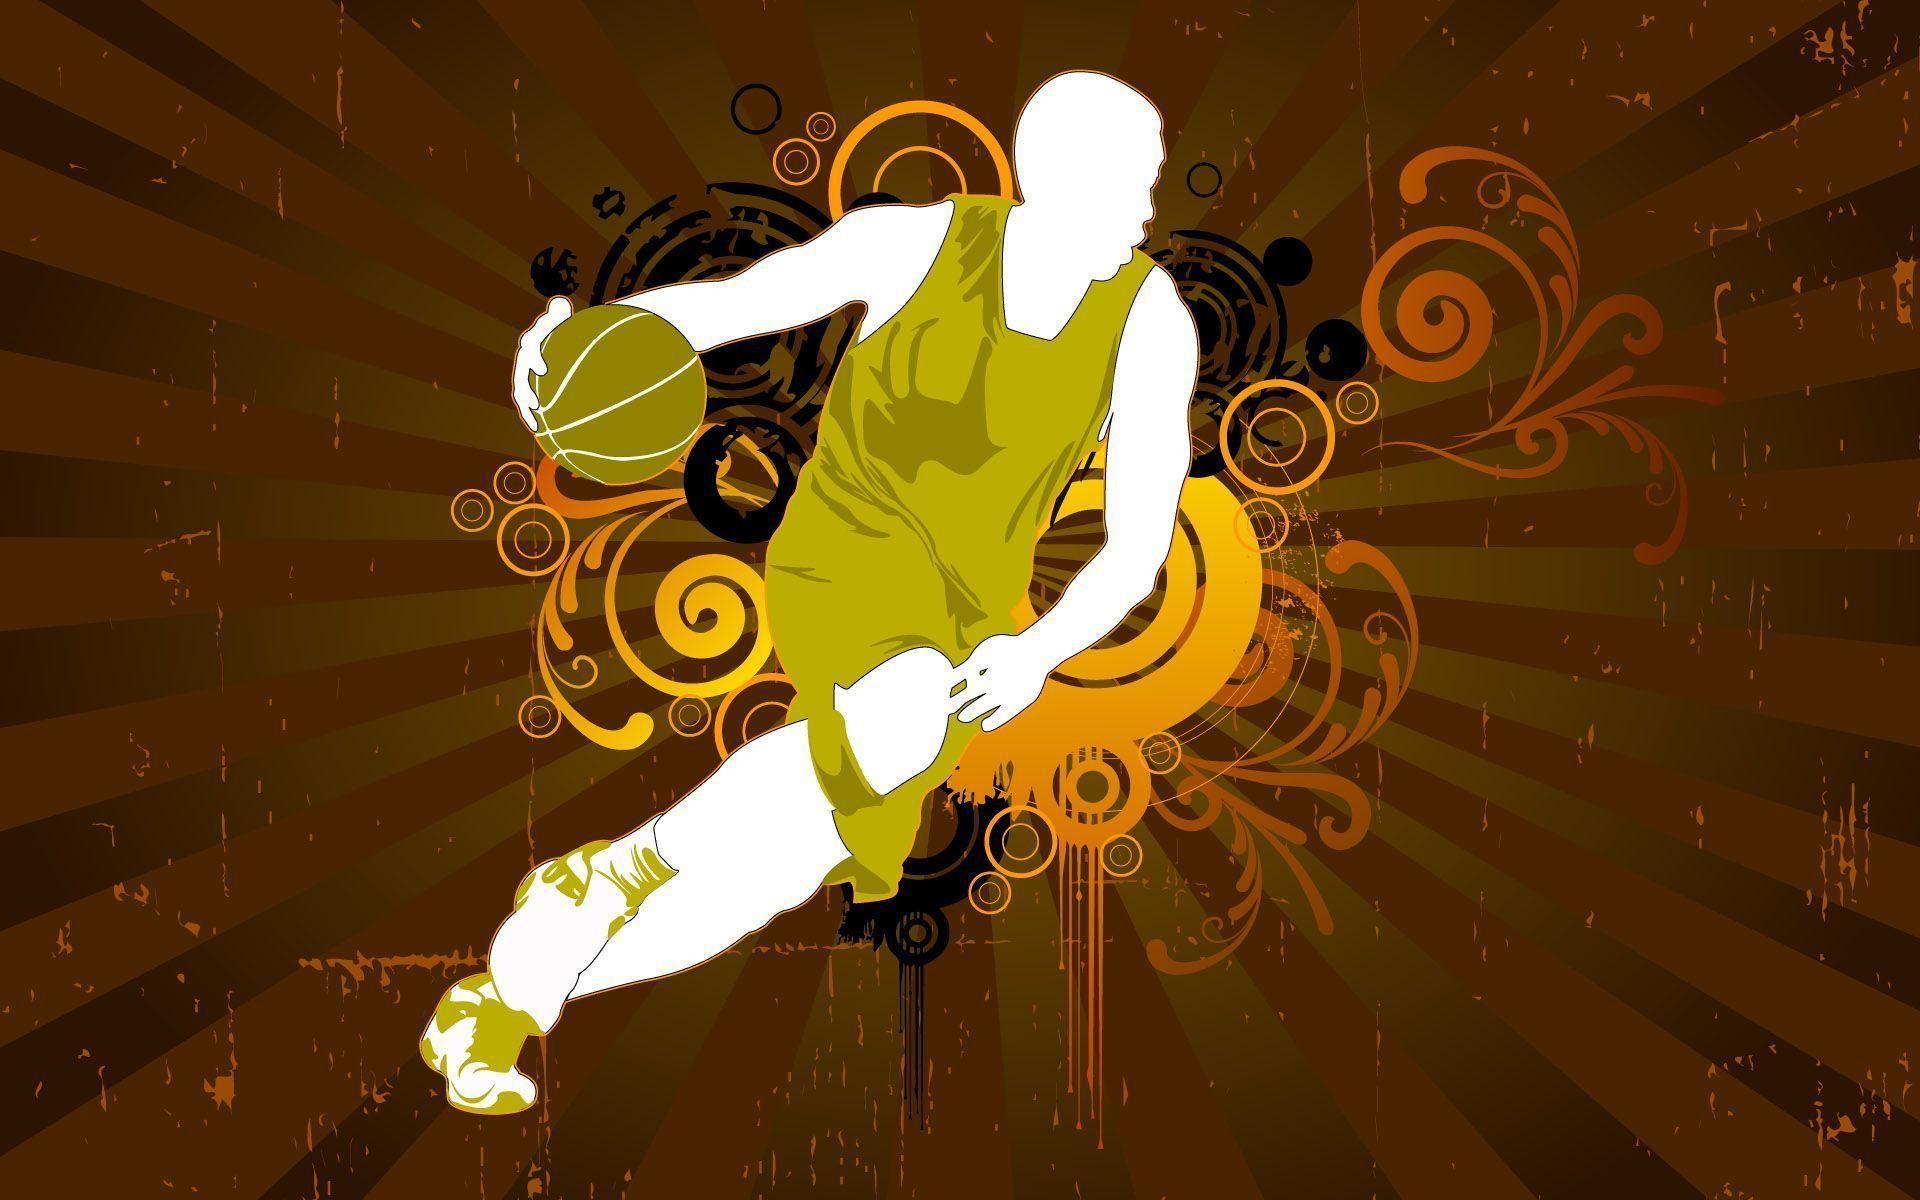 1920x1200 Wallpapers For > Cool Basketball Backgrounds For Computers